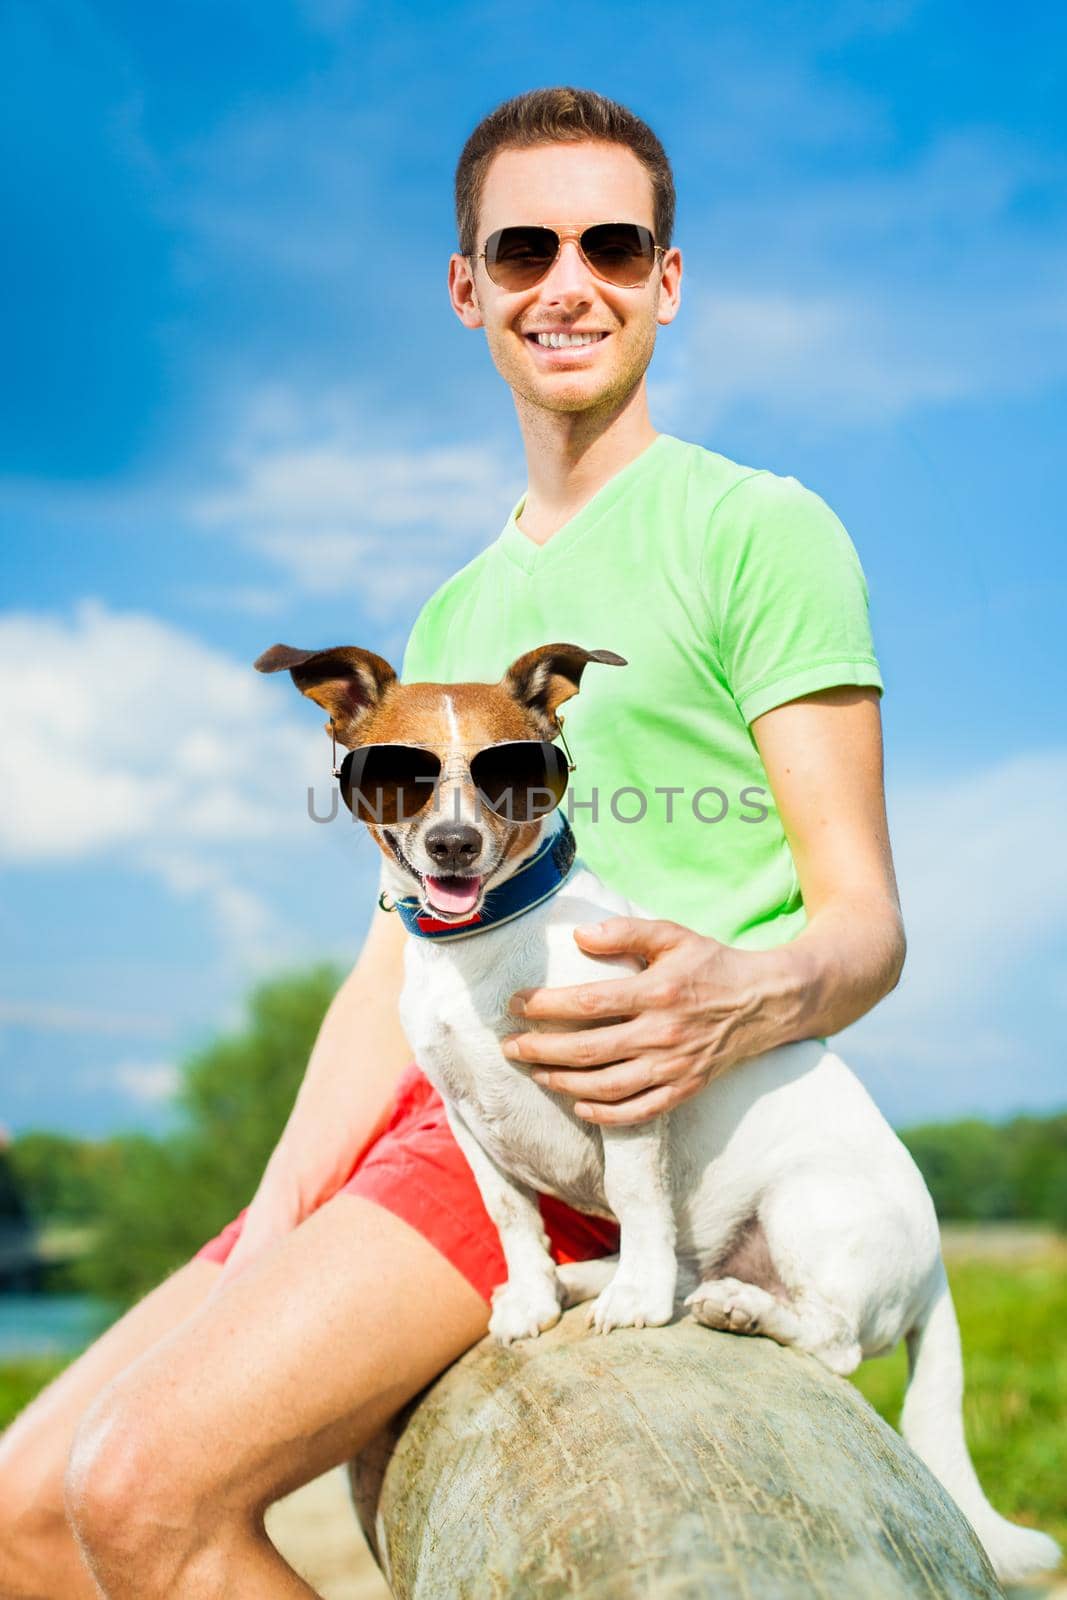 dog and owner observing together , sitting very close together having a good time outdoors in the park